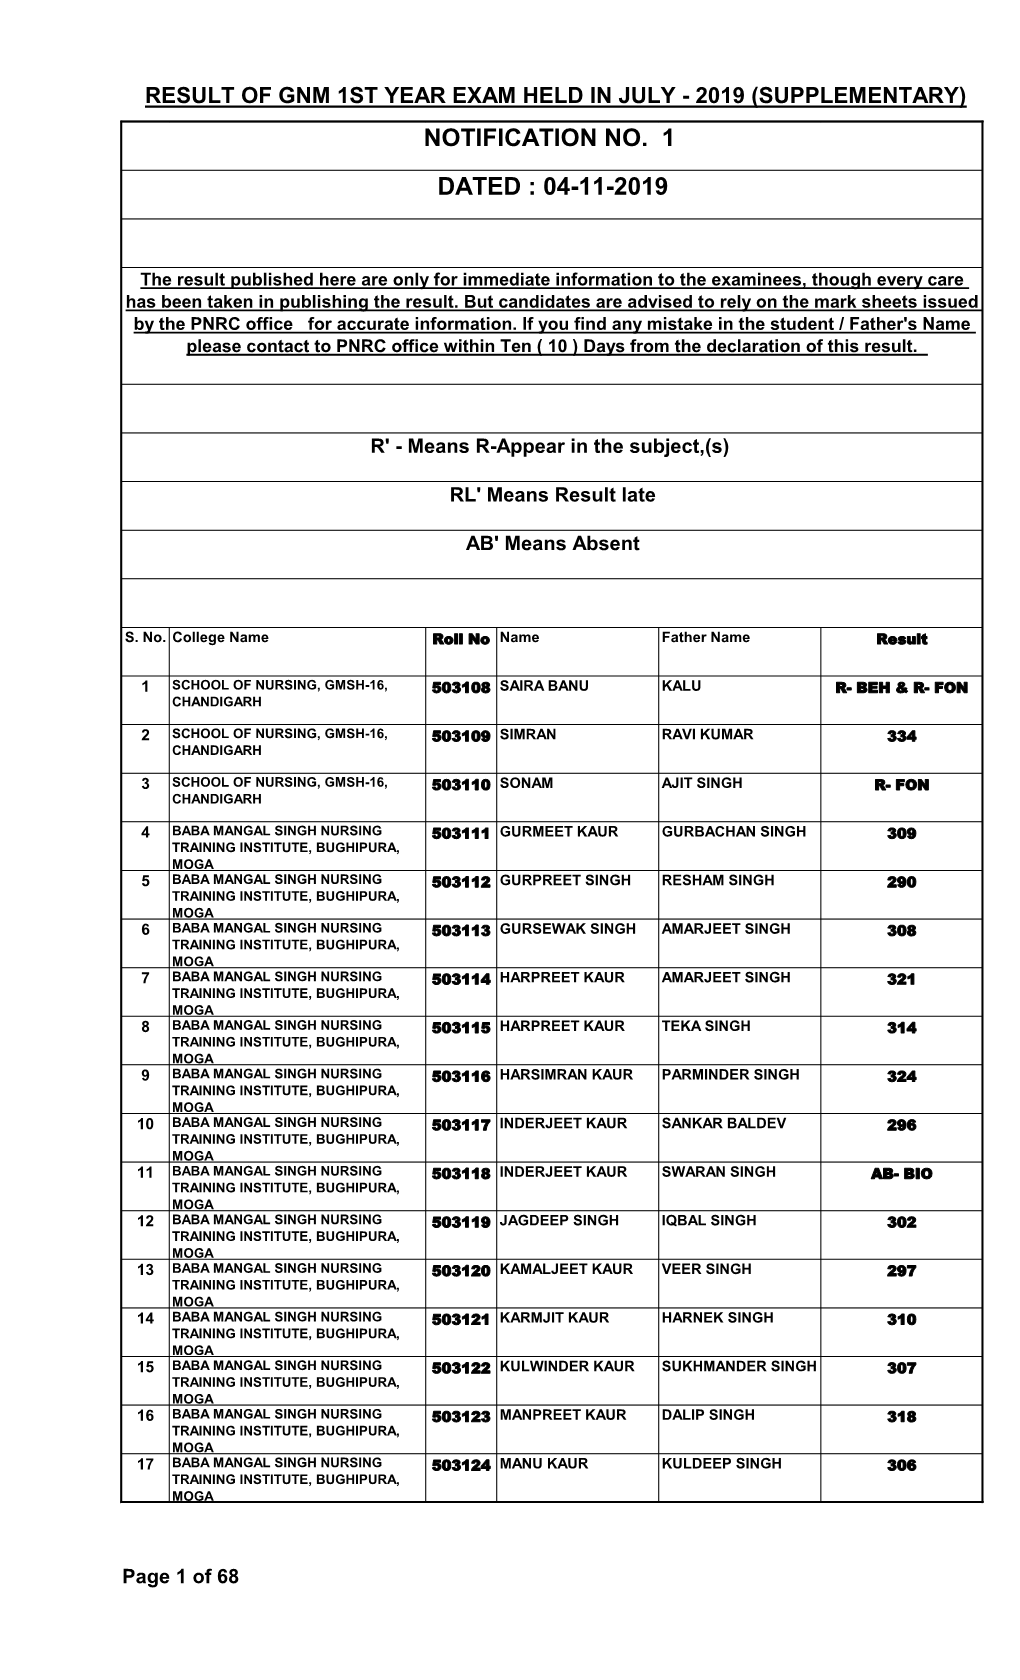 Result of Gnm 1St Year Exam Held in July 2019 (Supplementary) (04-11